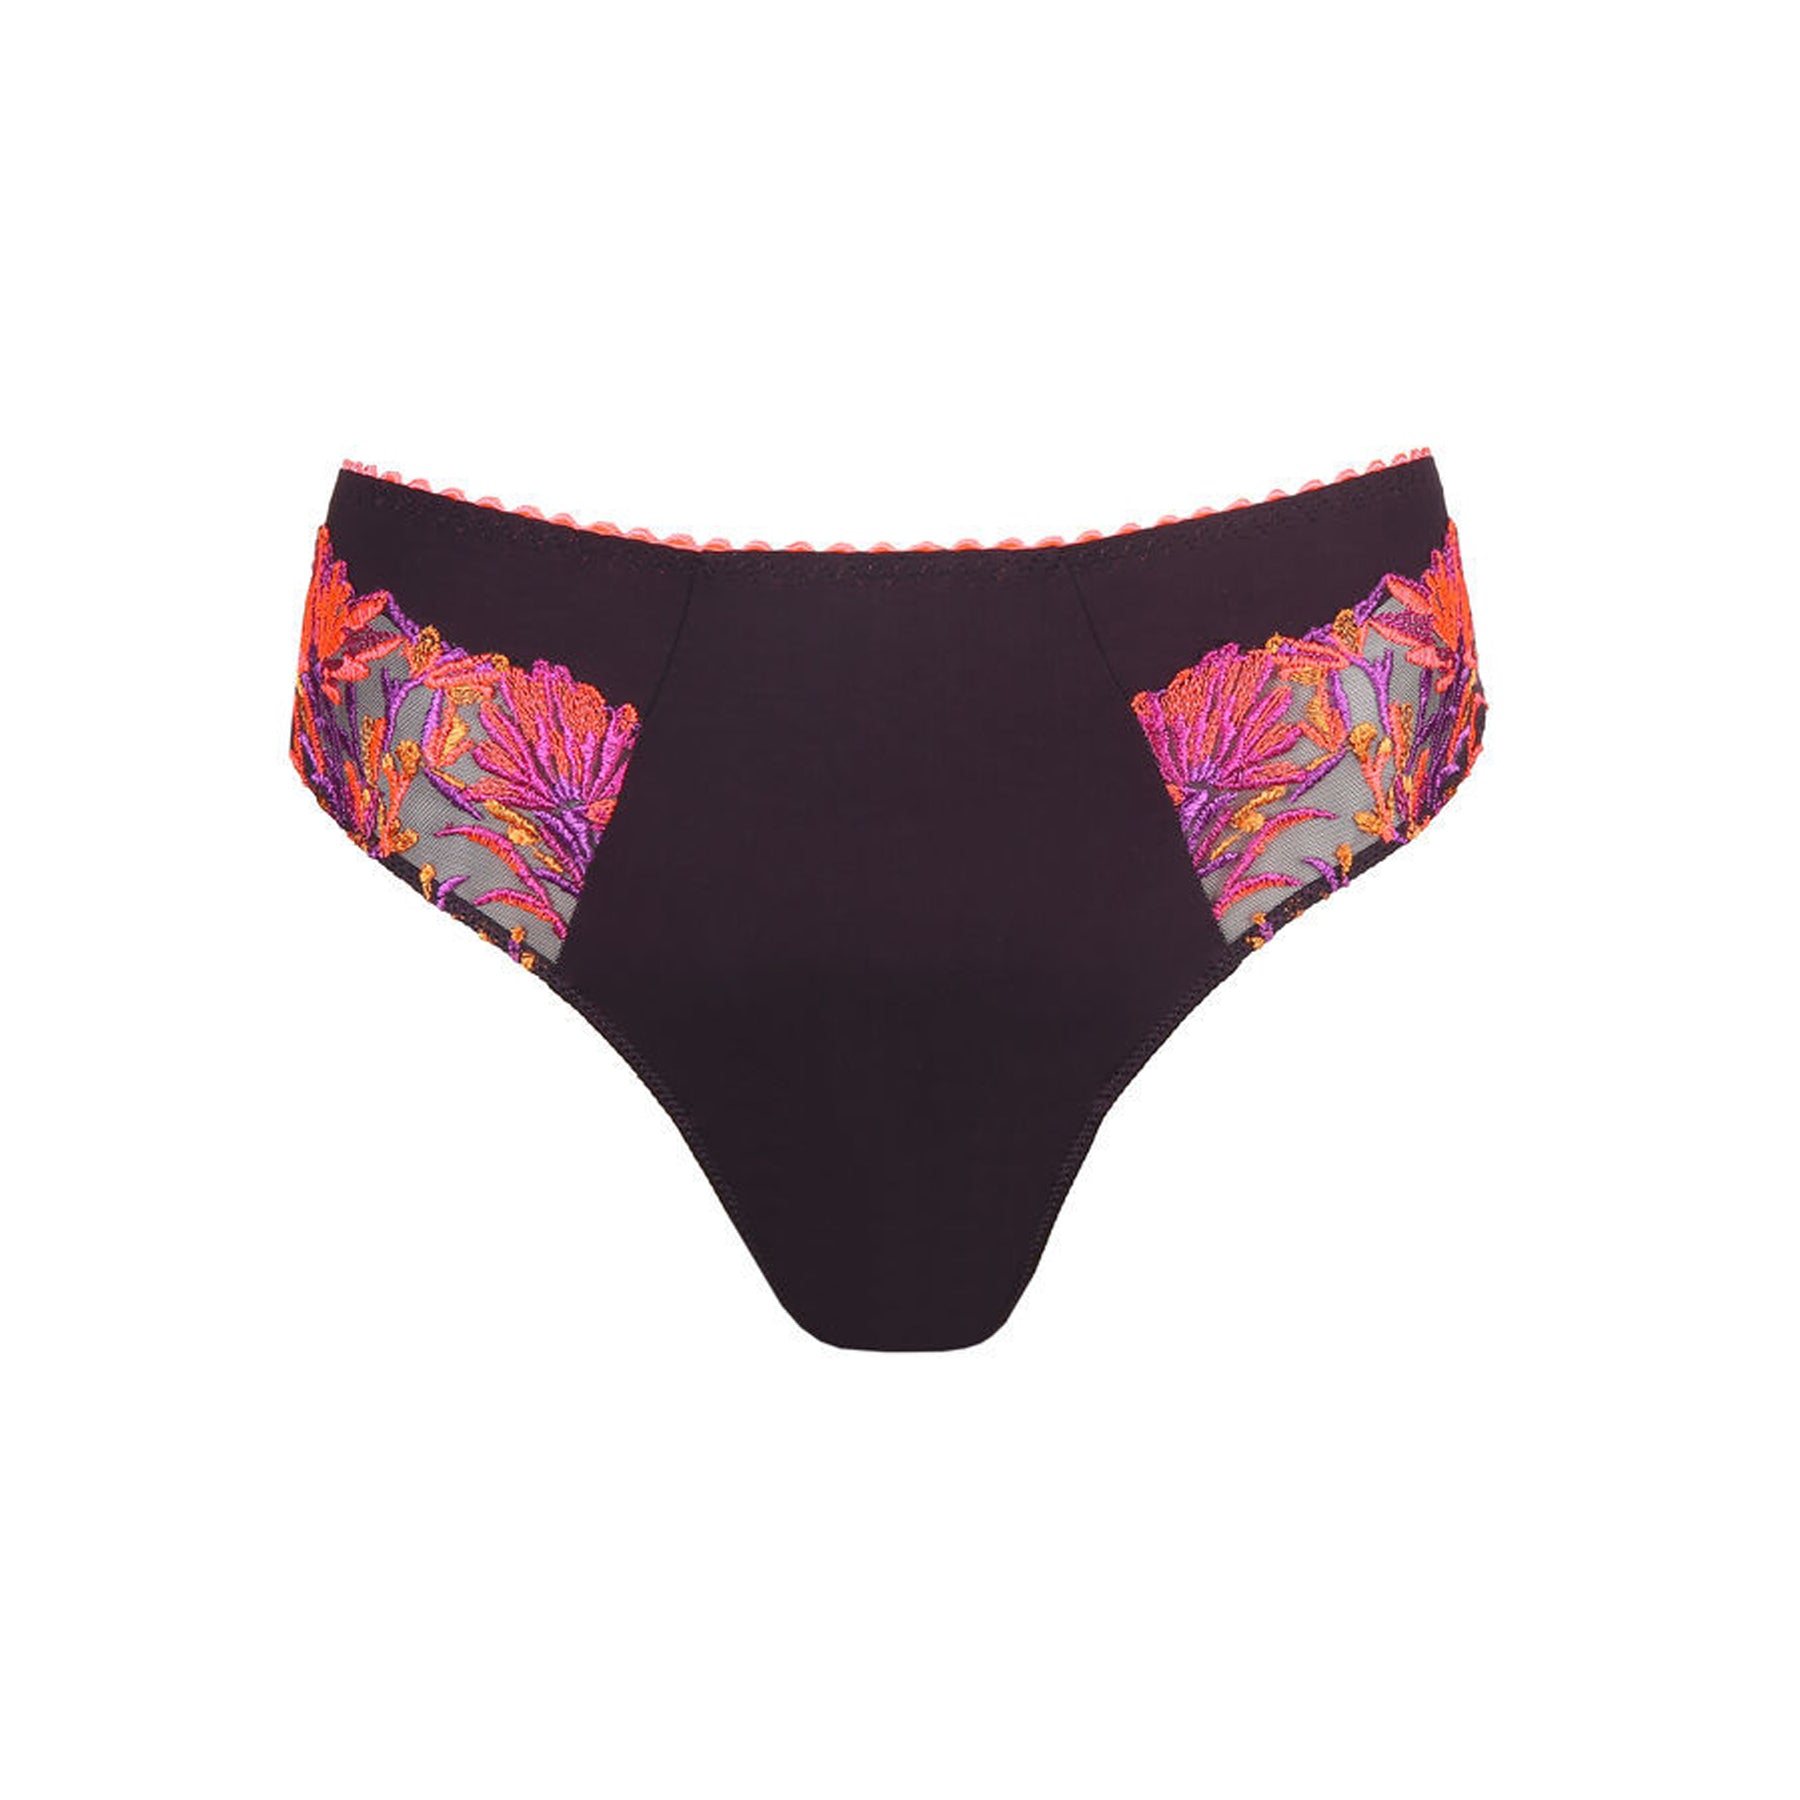 Perfects Be Sweet Tanga Brief, Floral Print - Lingerie Clearance